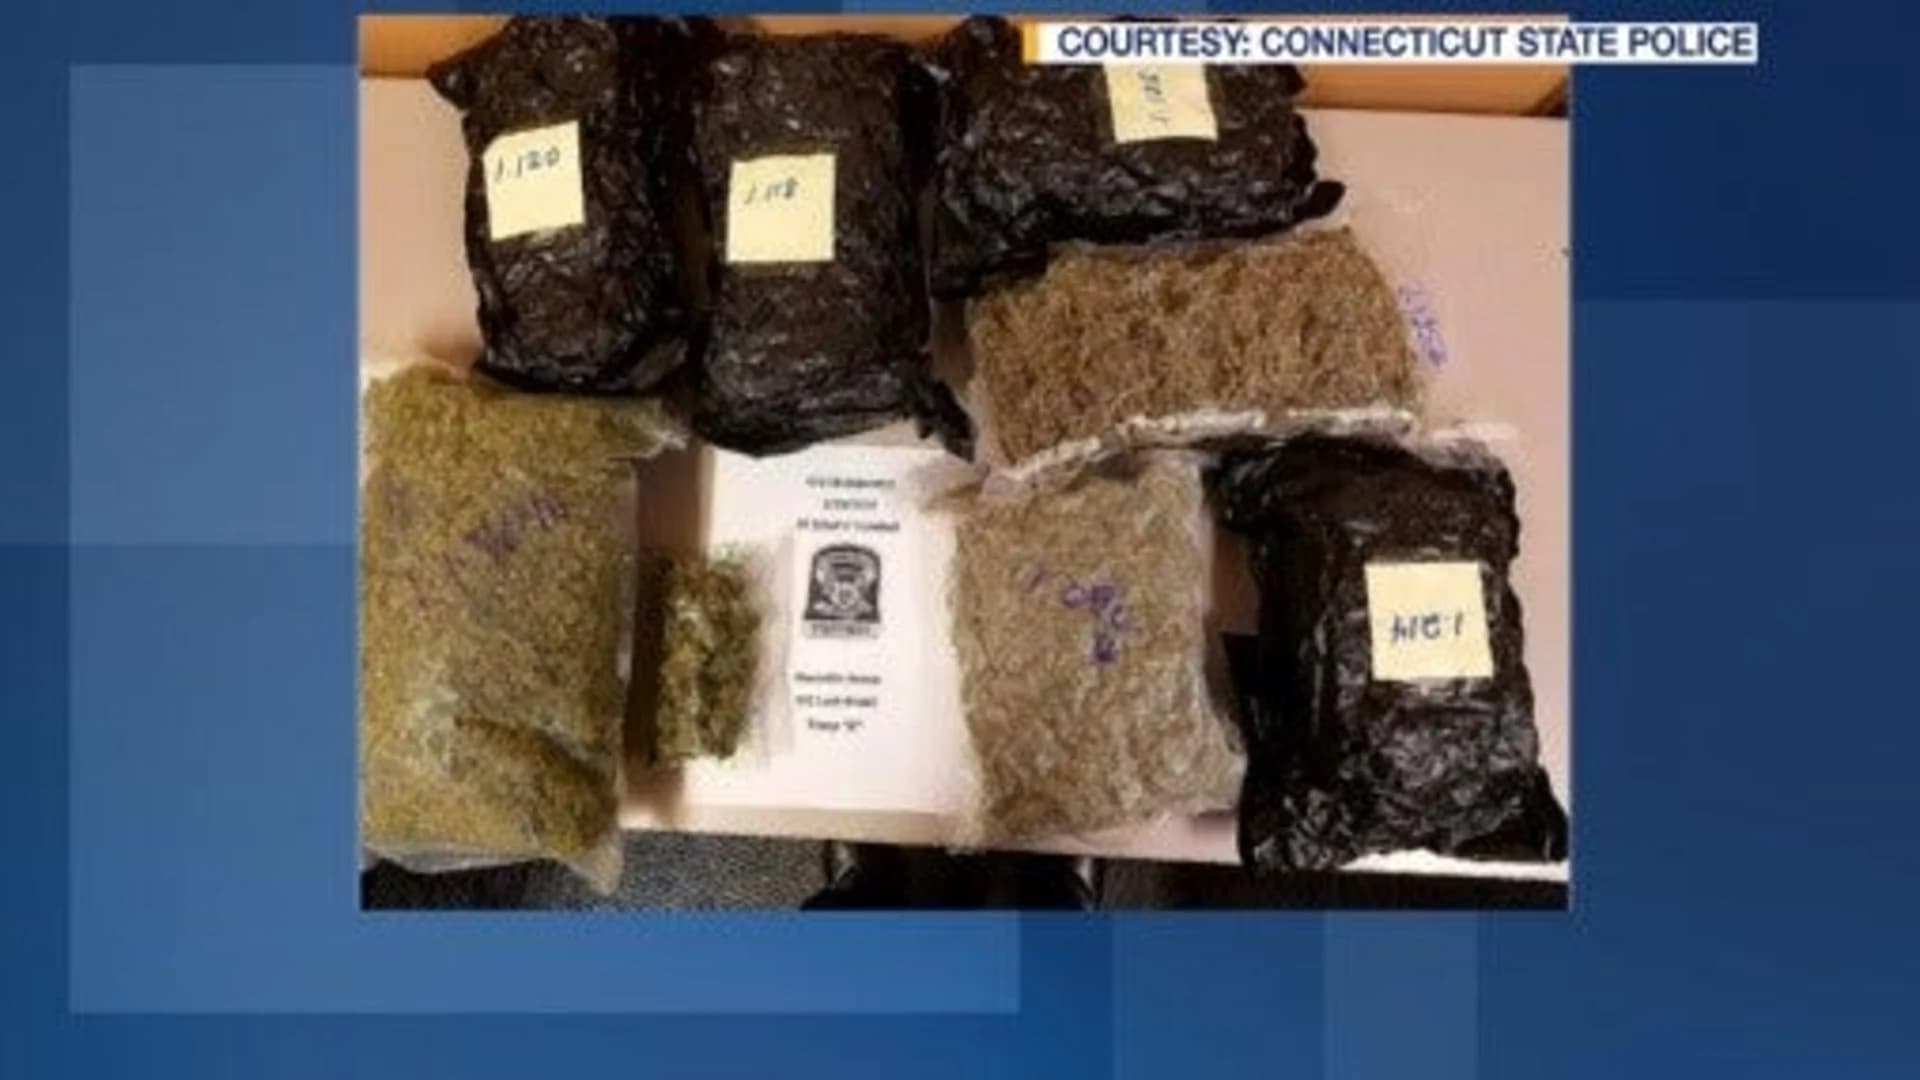 State police seize over 8 pounds of marijuana following traffic stop